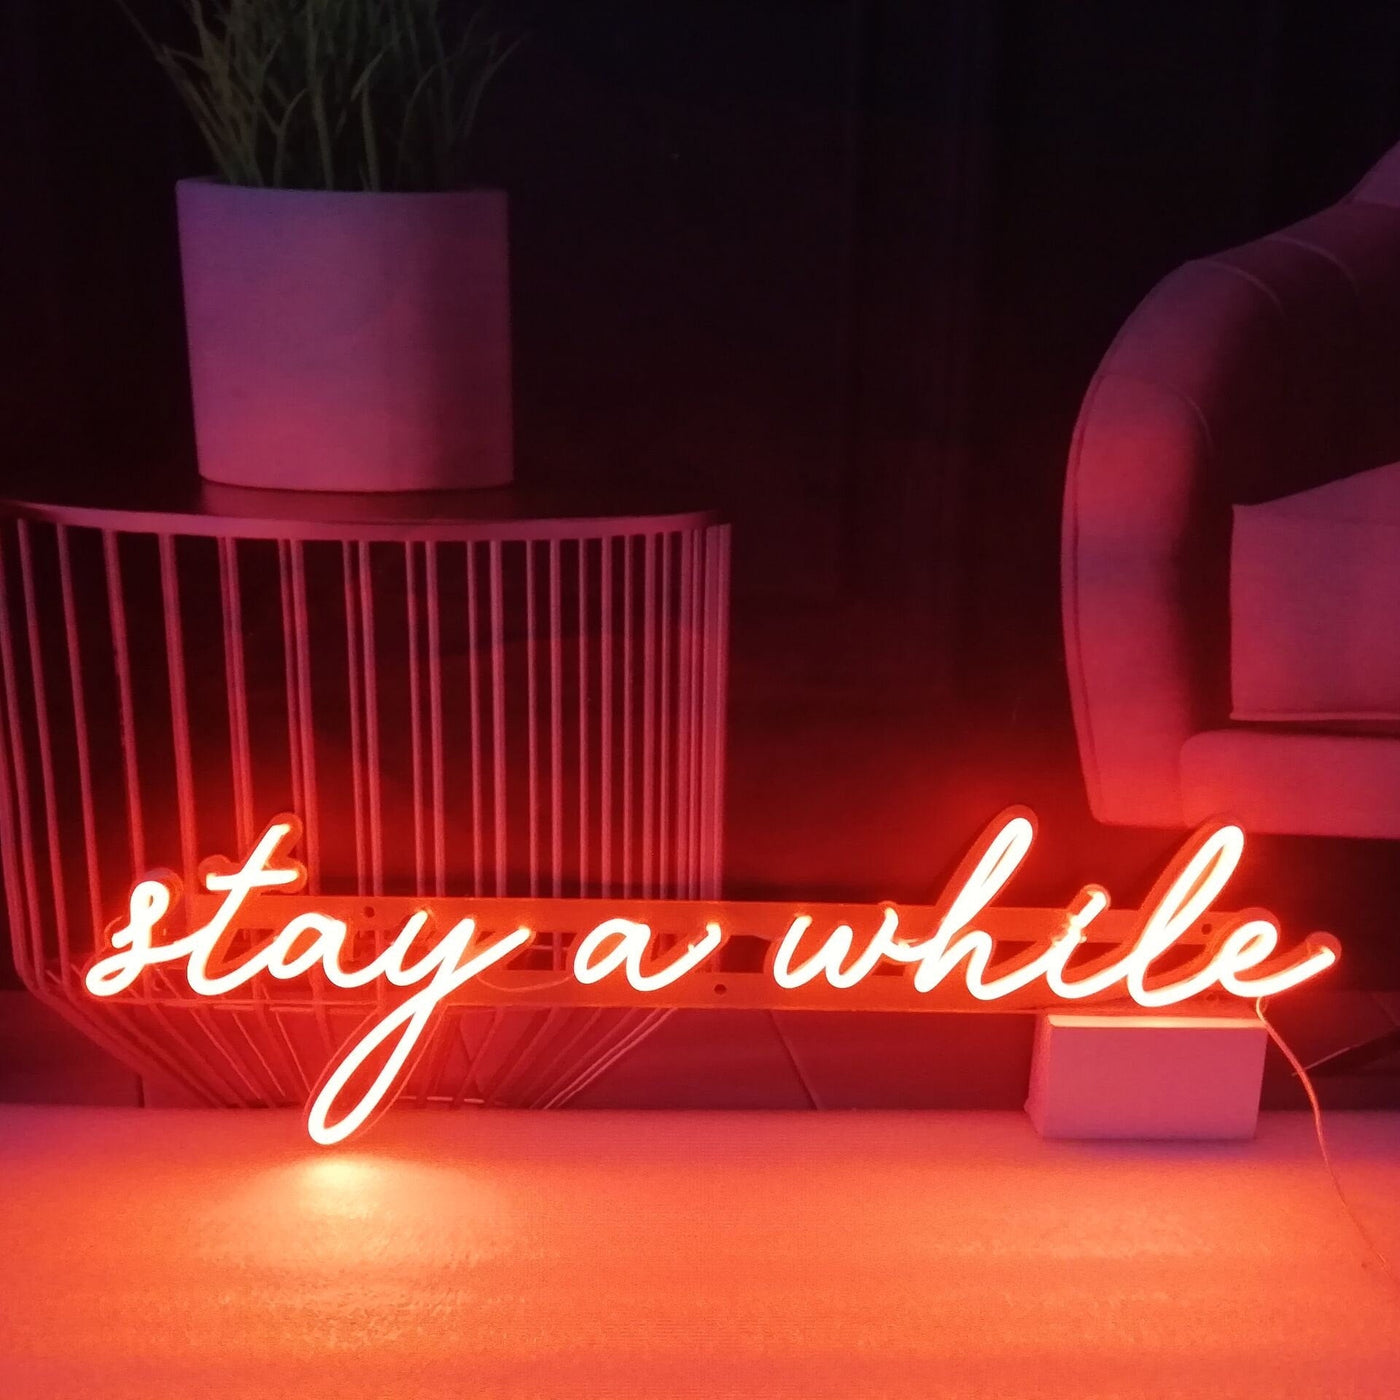 stay a while Neon Signs Led Neon Light Wall Hanging